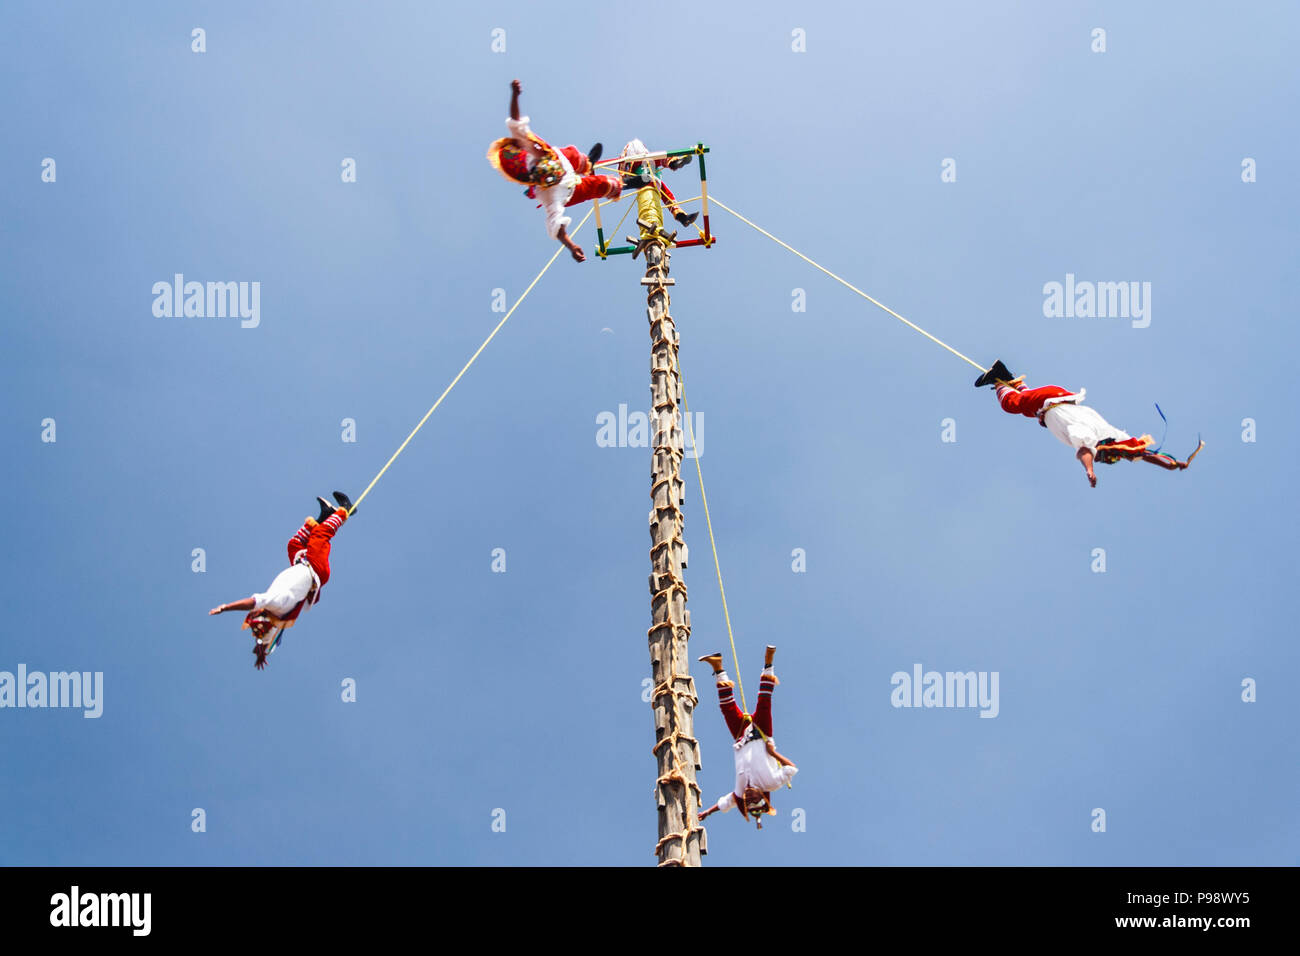 Teotihuacan, Mexico : Totonac people dressed in traditional clothes performing the Voladores or Flying Men ceremony named an Intangible cultural herit Stock Photo